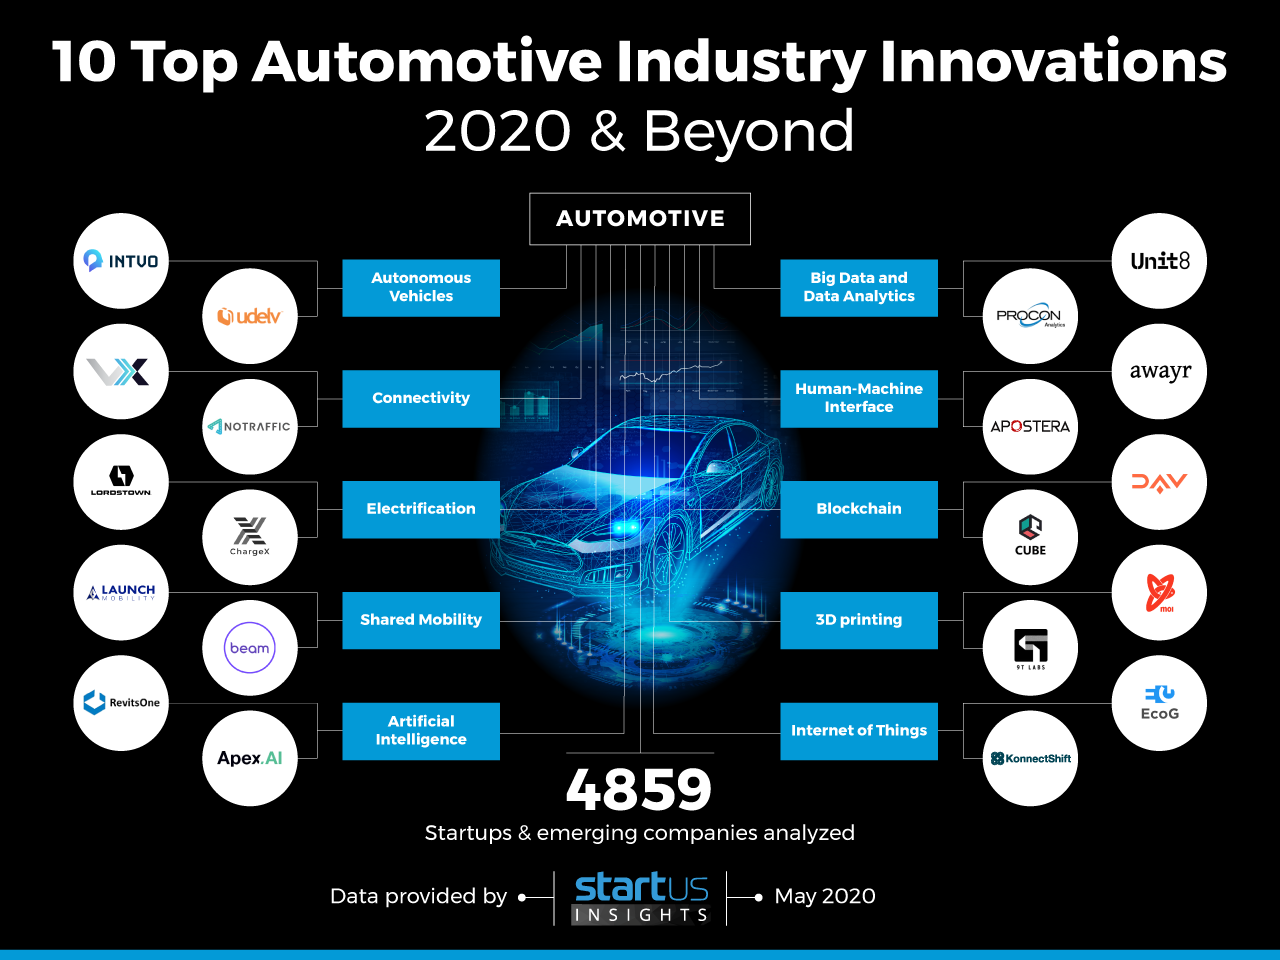 Top 10 Automotive Industry Trends & Innovations 2020 & Beyond